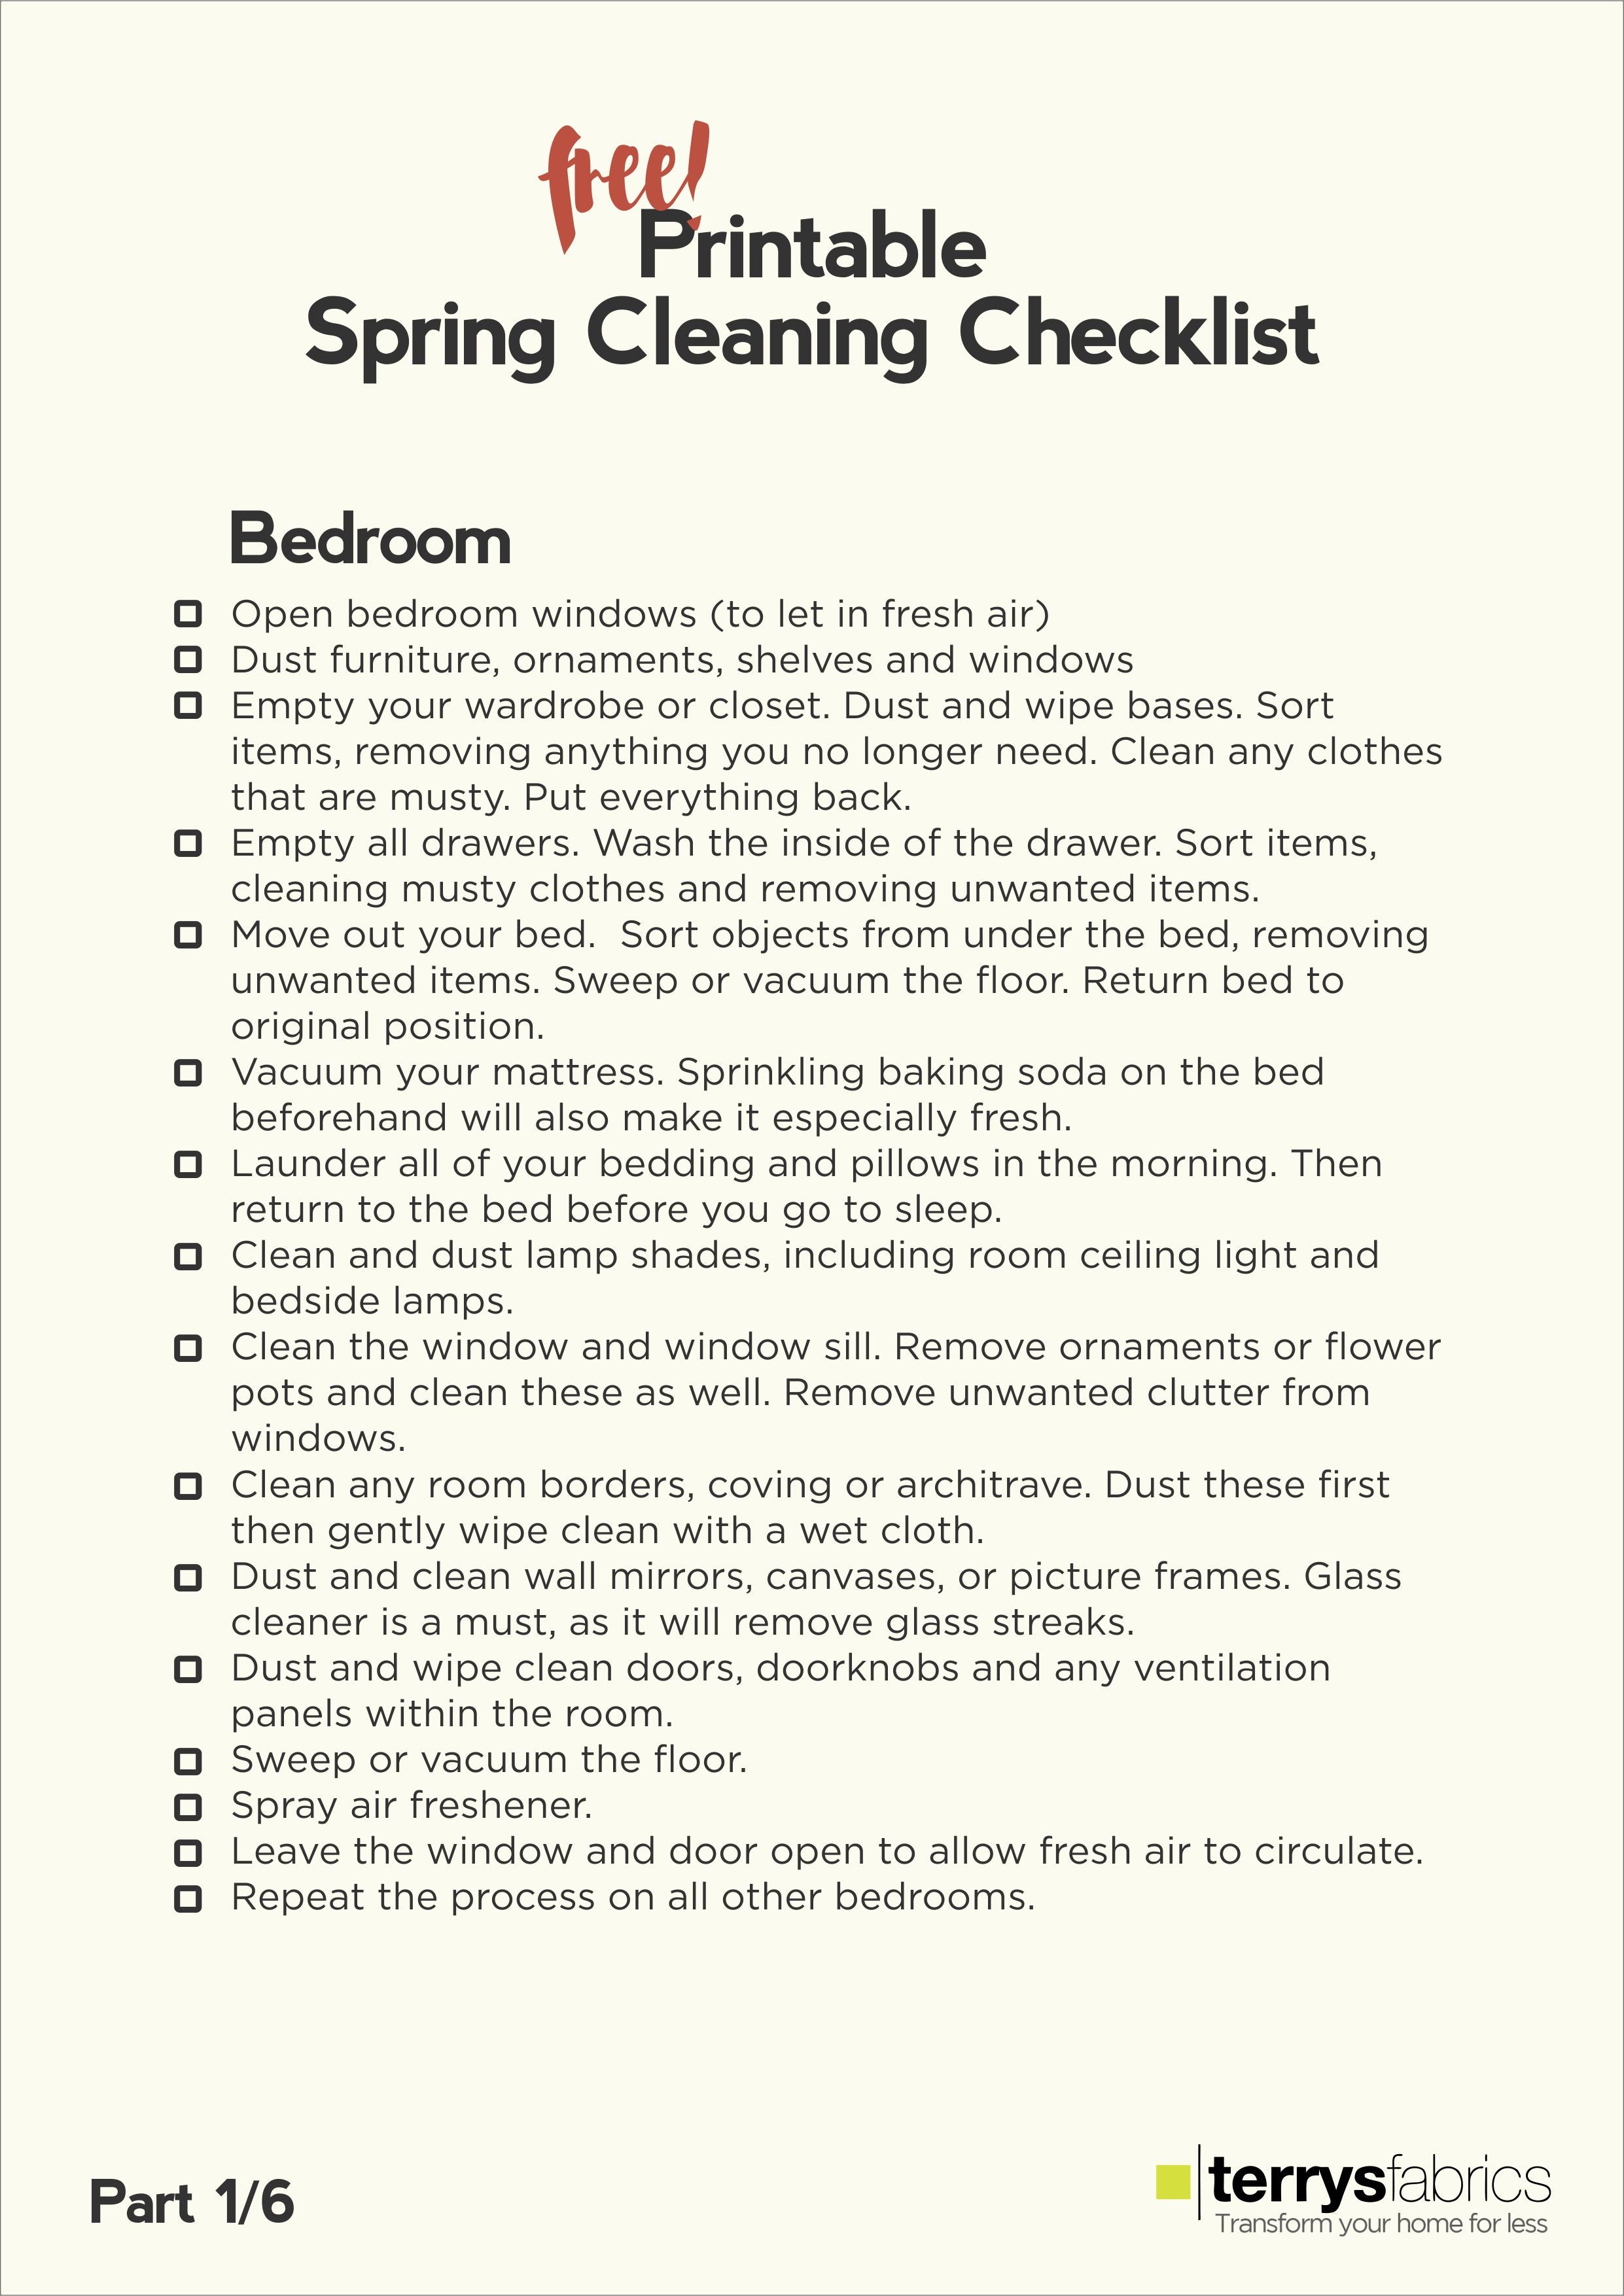 Ultimate Spring Cleaning Bedroom Checklist